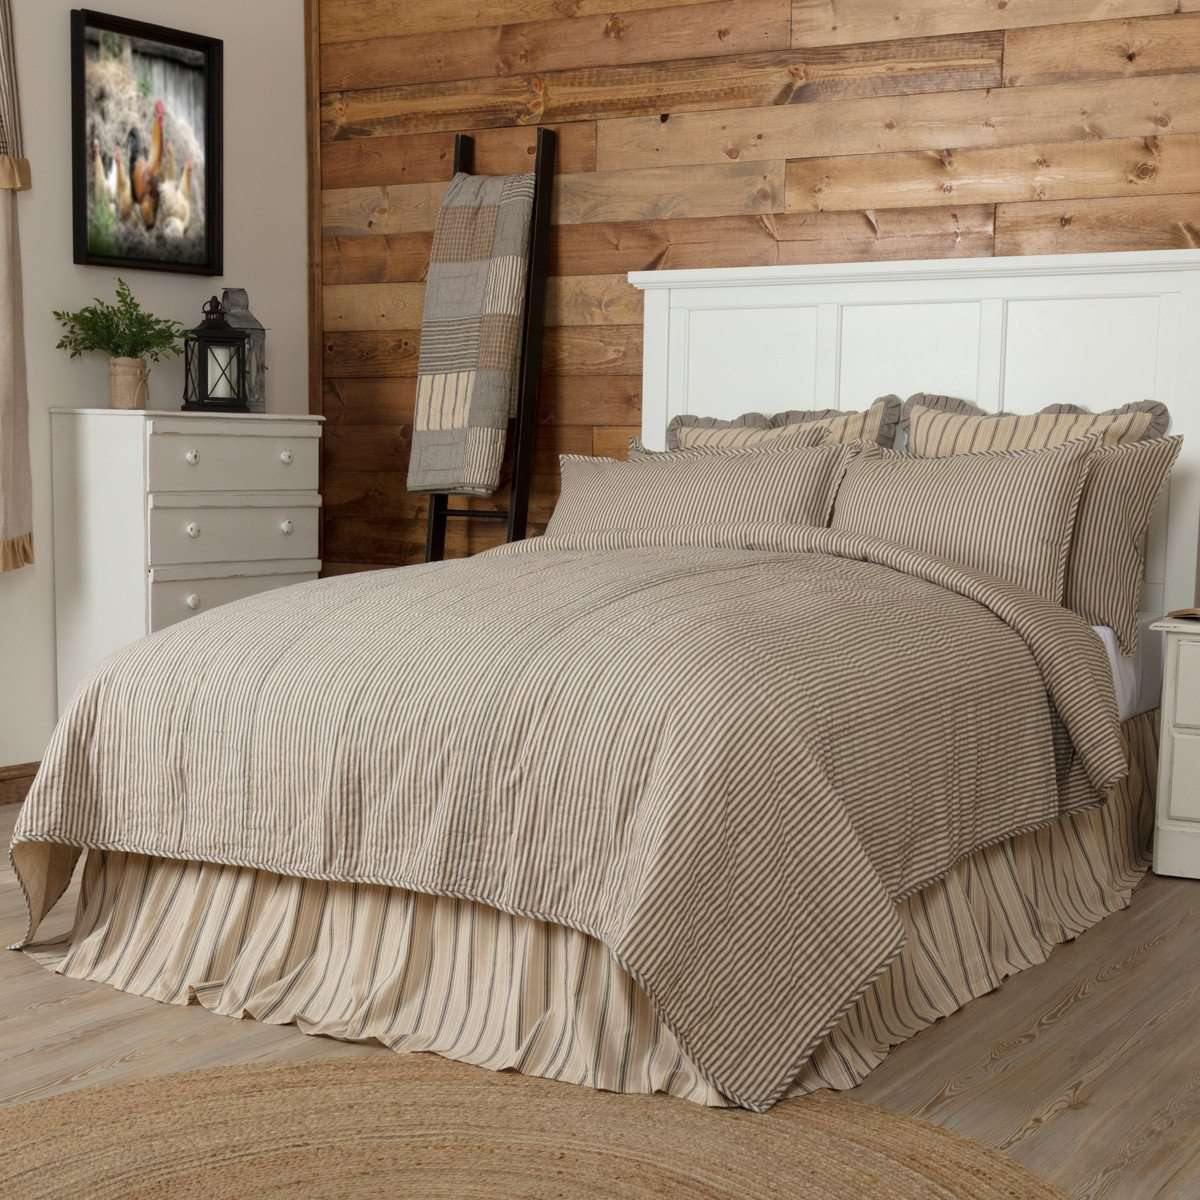 Sawyer Mill Charcoal Ticking Stripe Quilt Coverlet VHC Brands buy